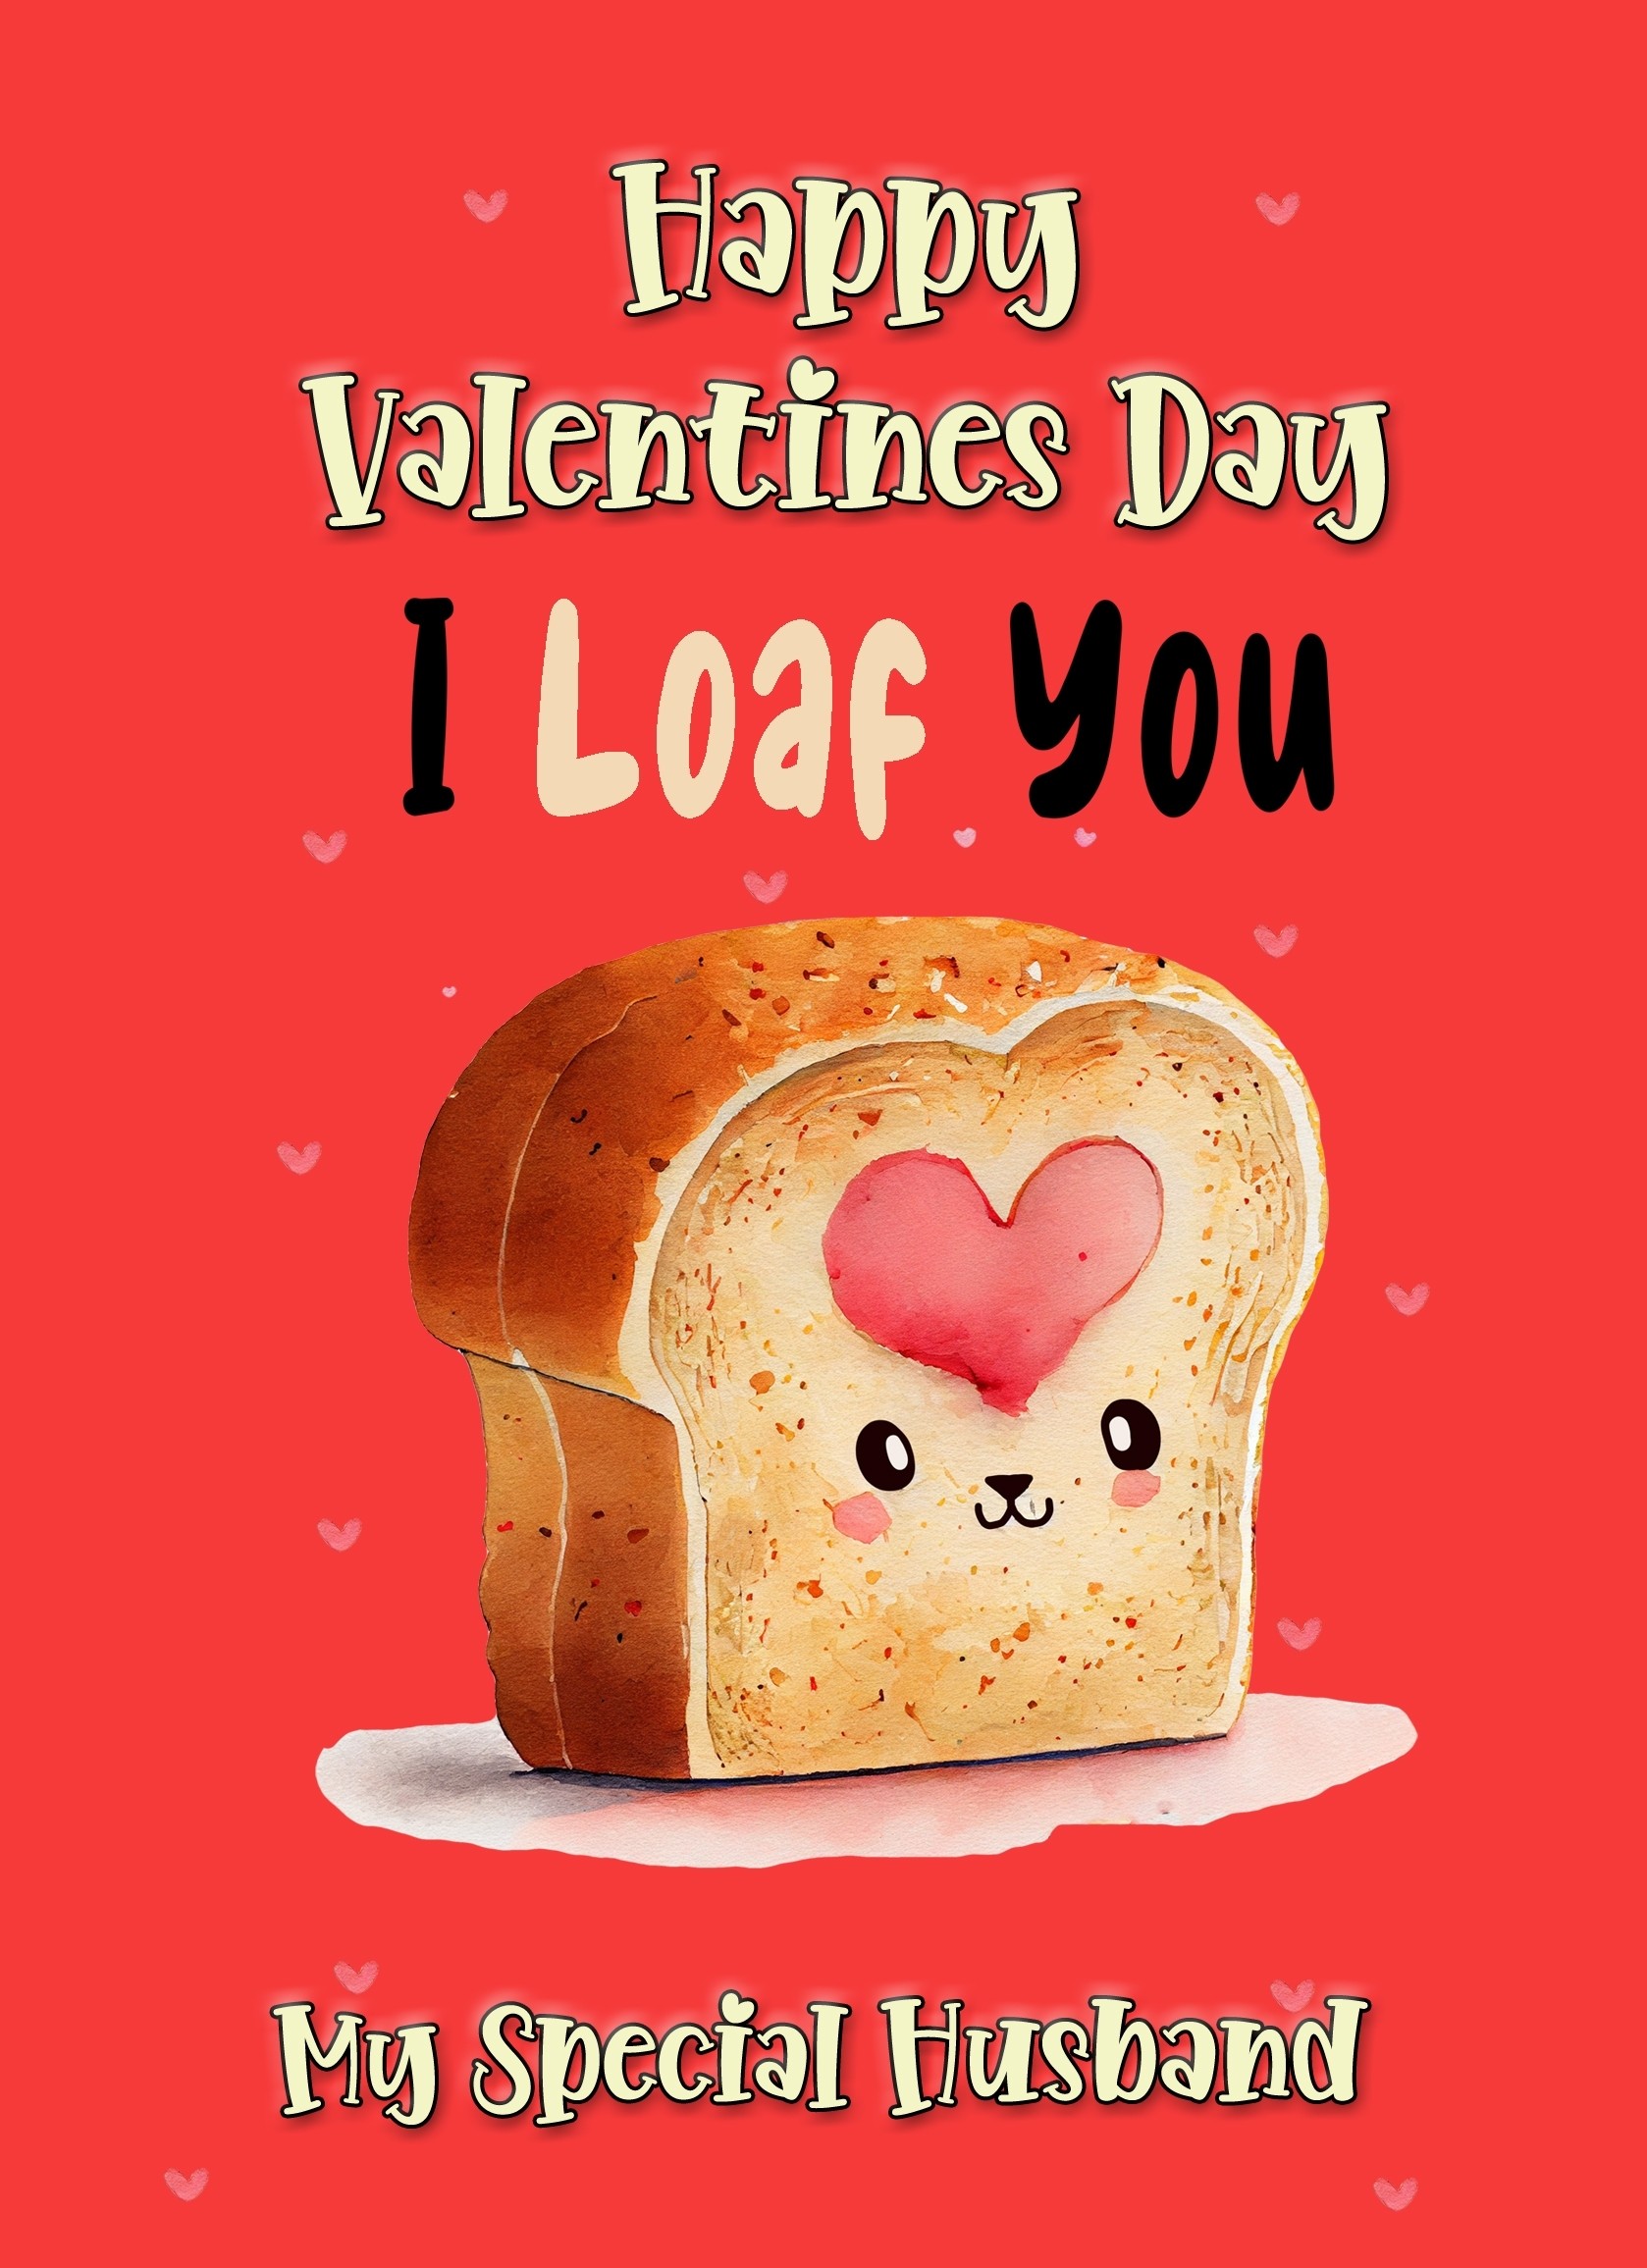 Funny Pun Valentines Day Card for Husband (Loaf You)